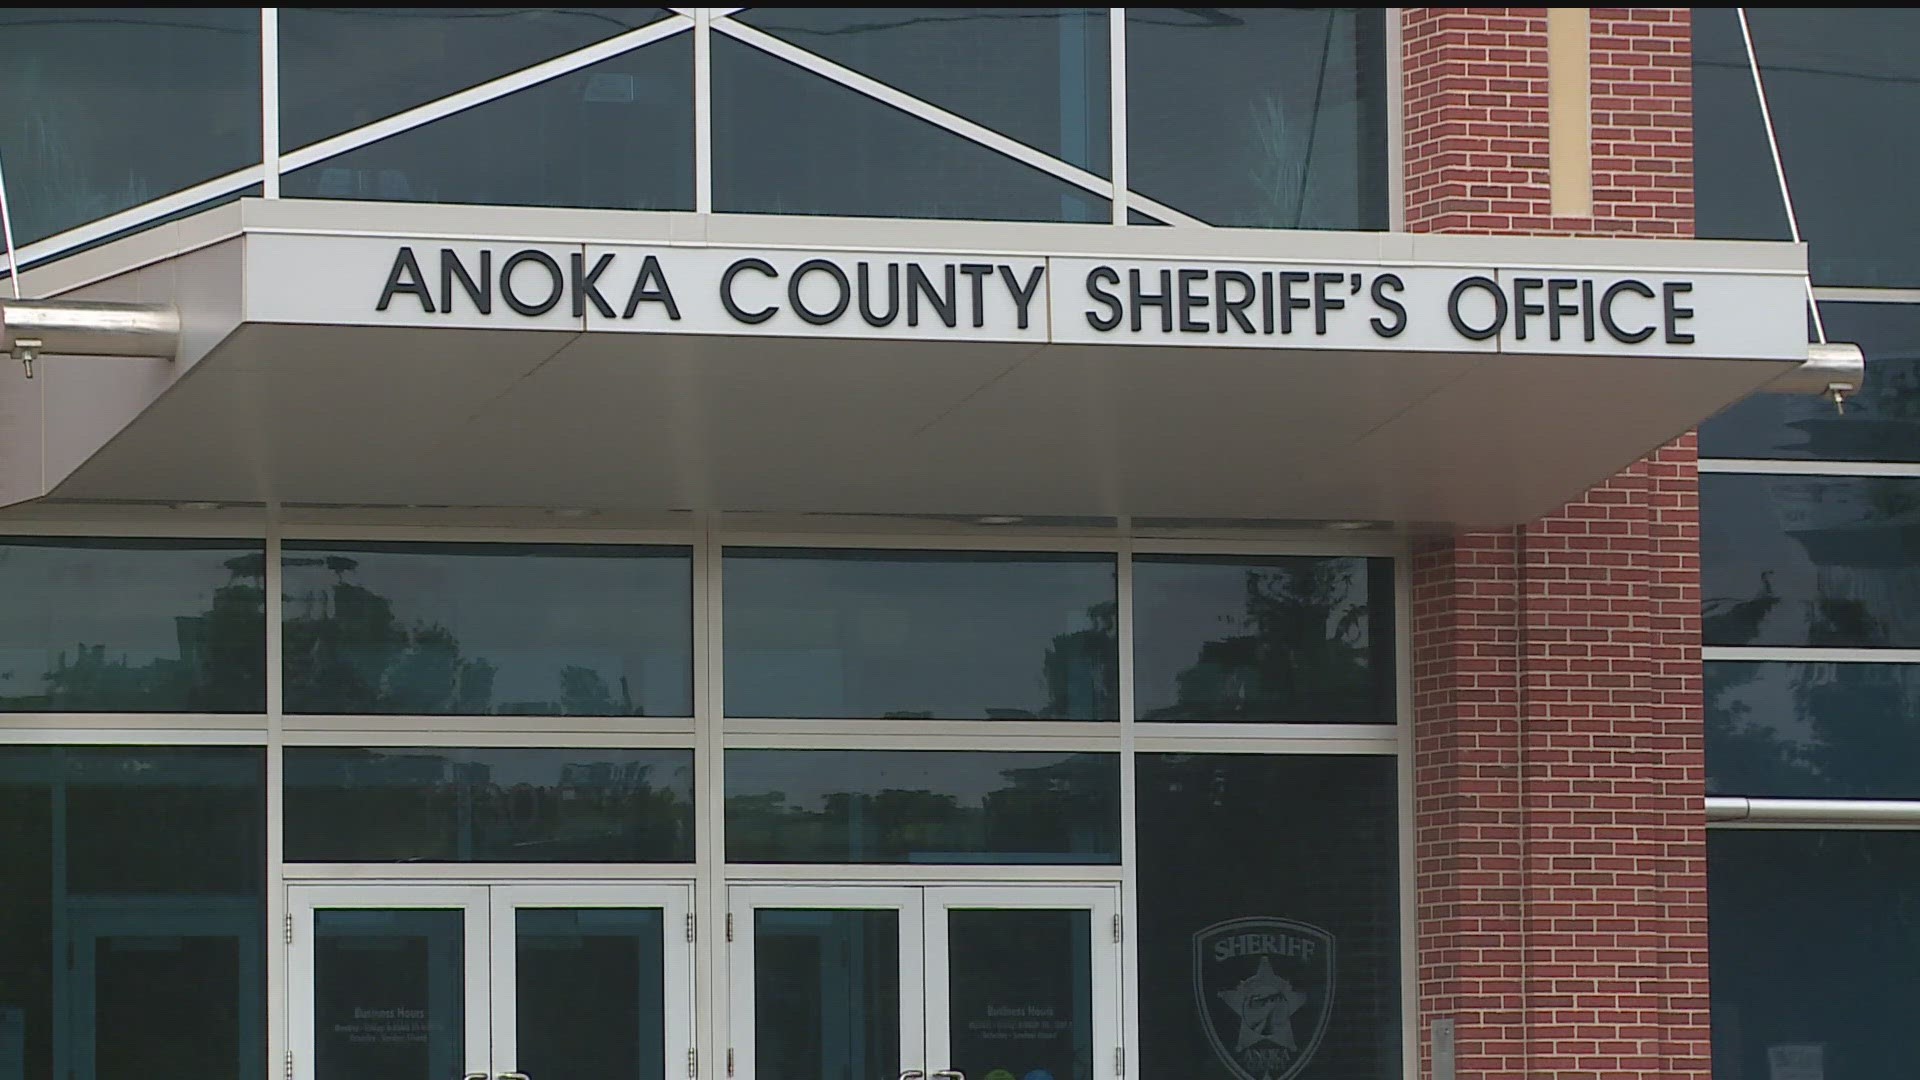 Anoka-Hennepin School District confirmed that the Anoka County Sheriff's Office won't be stationing deputies at Andover High School and Oak View Middle School.